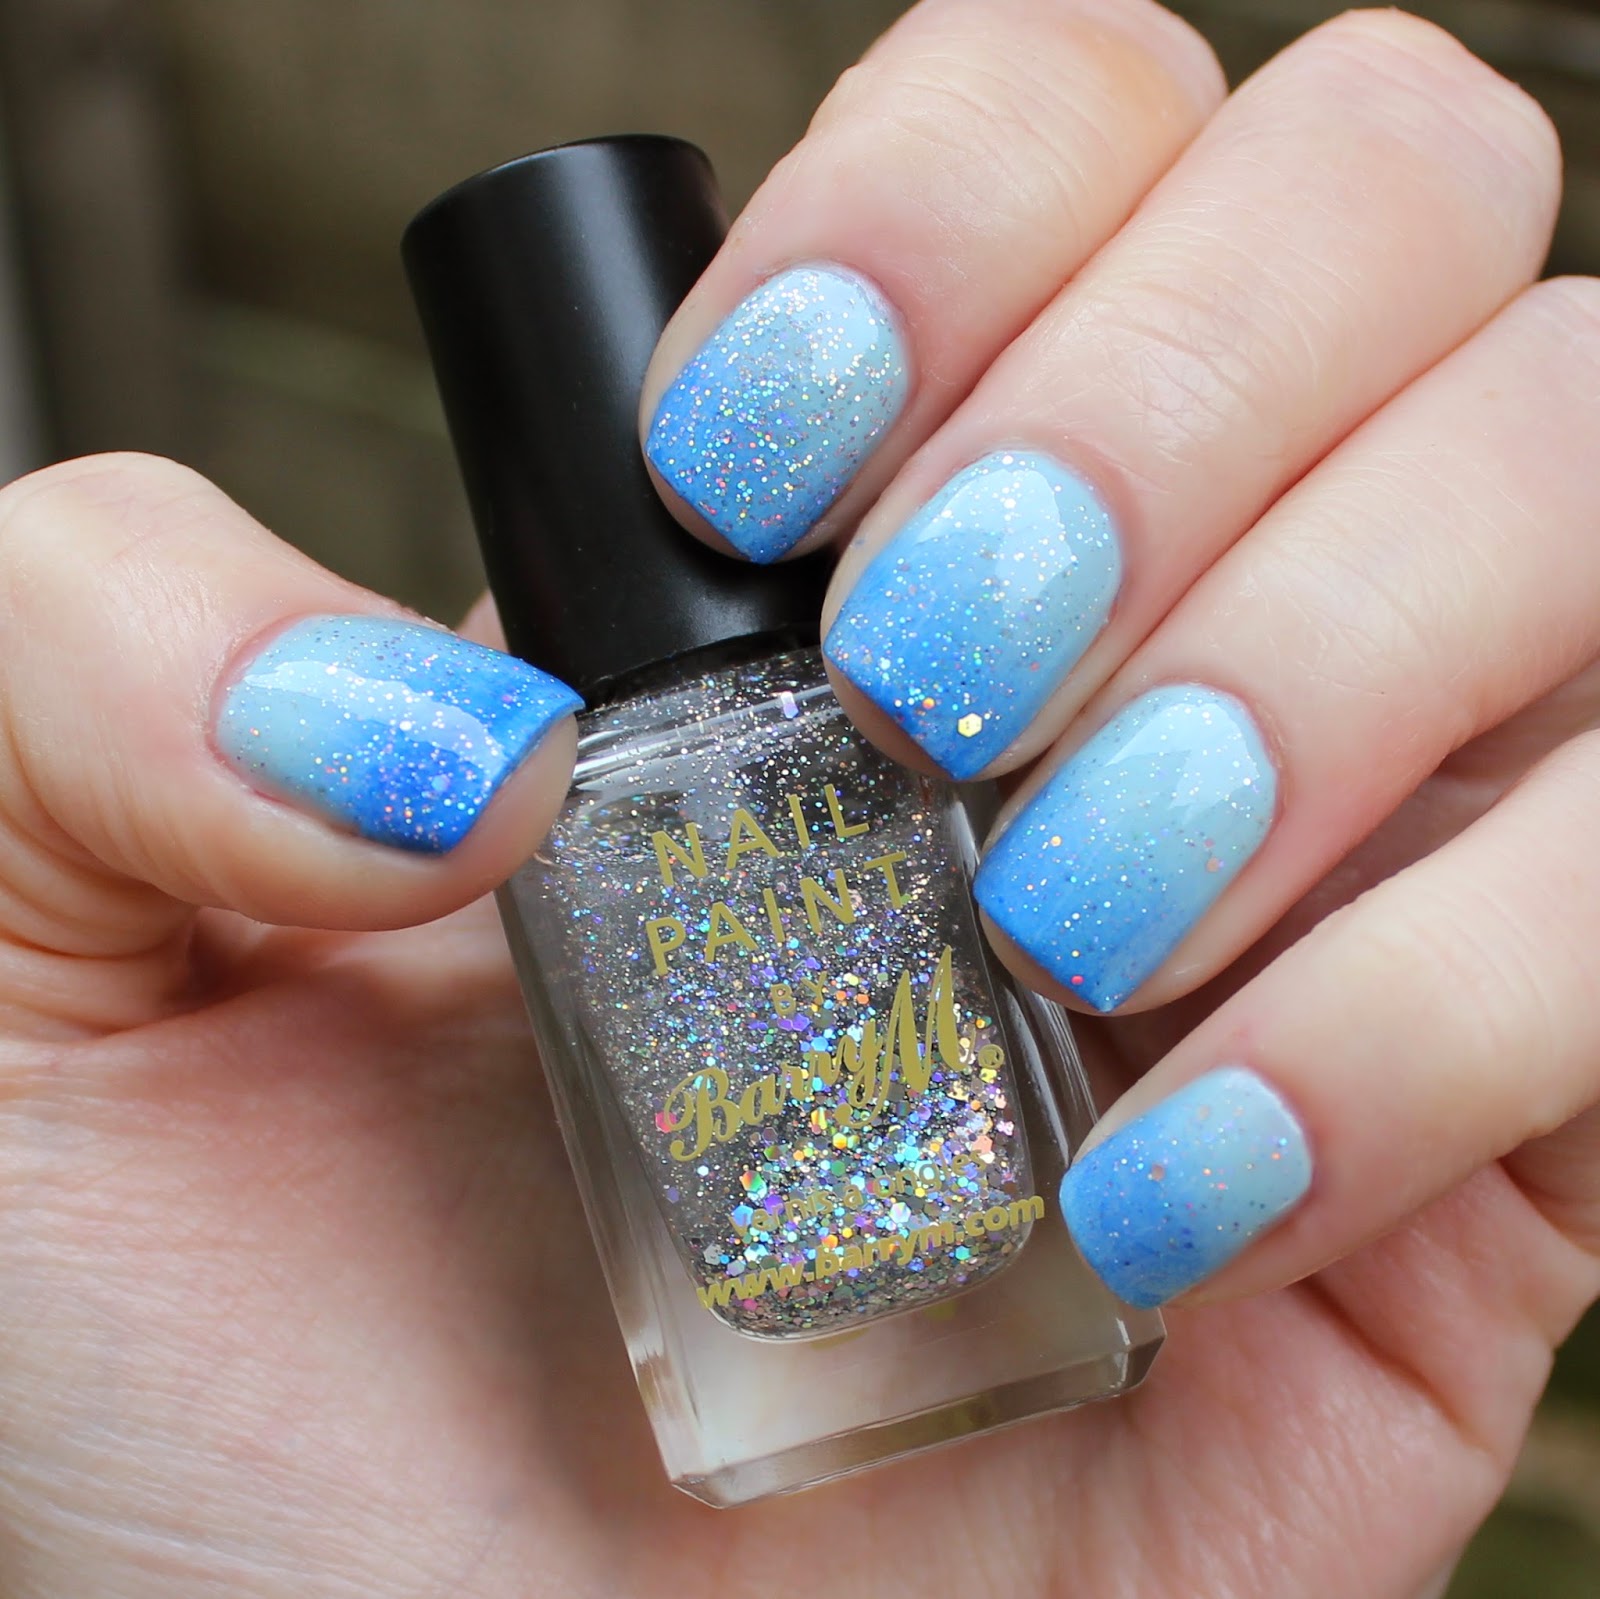 Dahlia Nails: A Dream Is A Wish Your Heart Makes